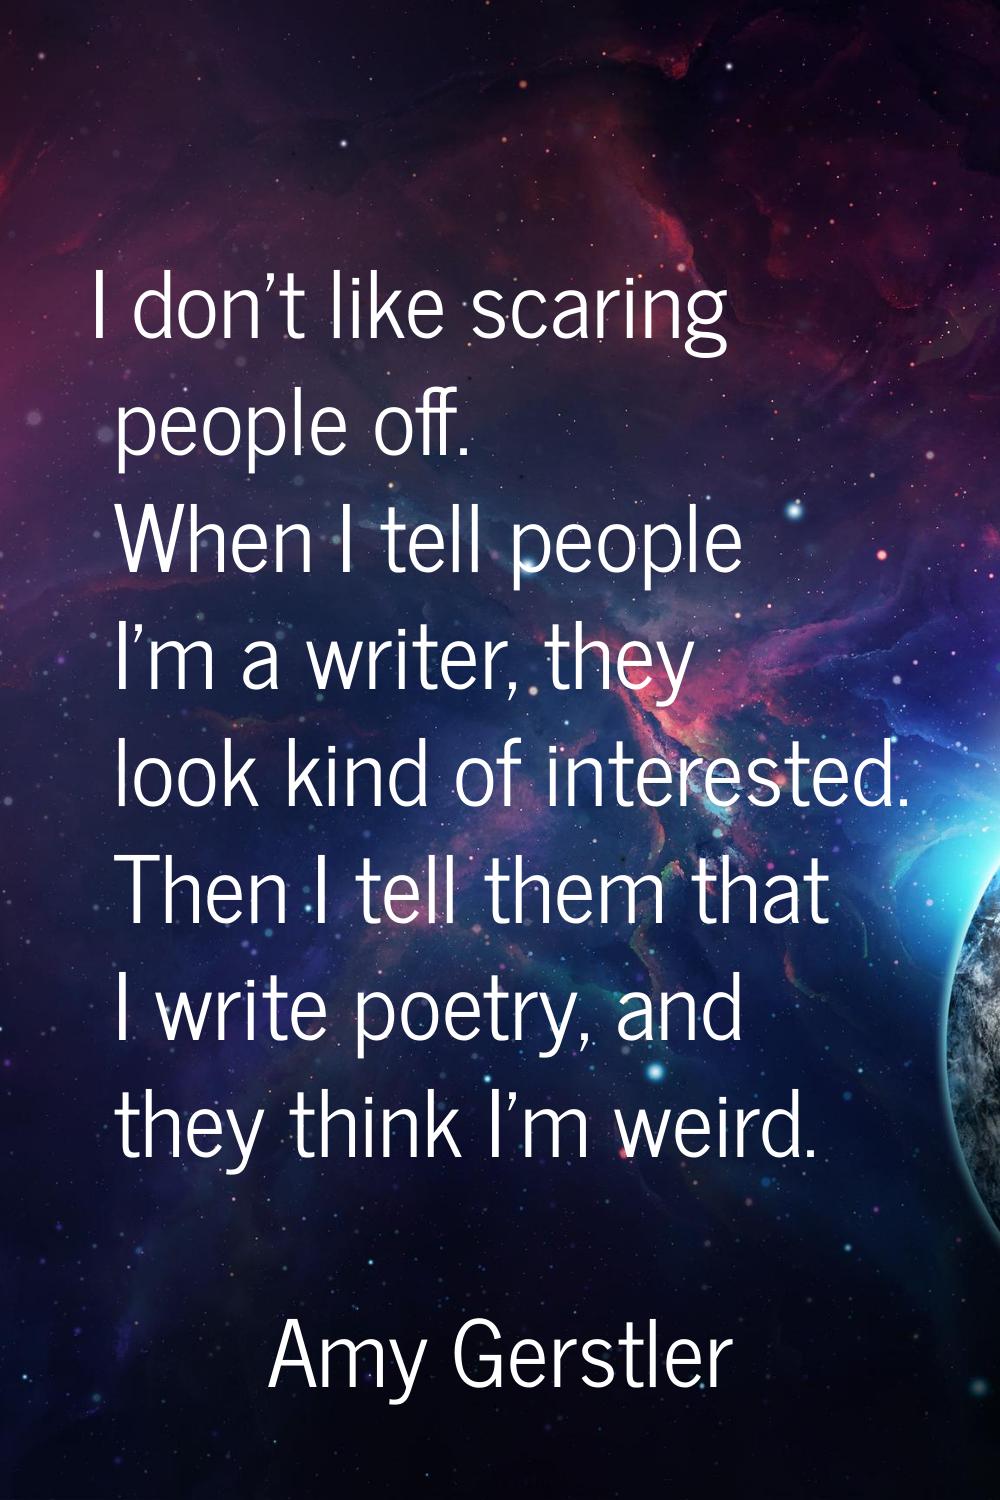 I don't like scaring people off. When I tell people I'm a writer, they look kind of interested. The